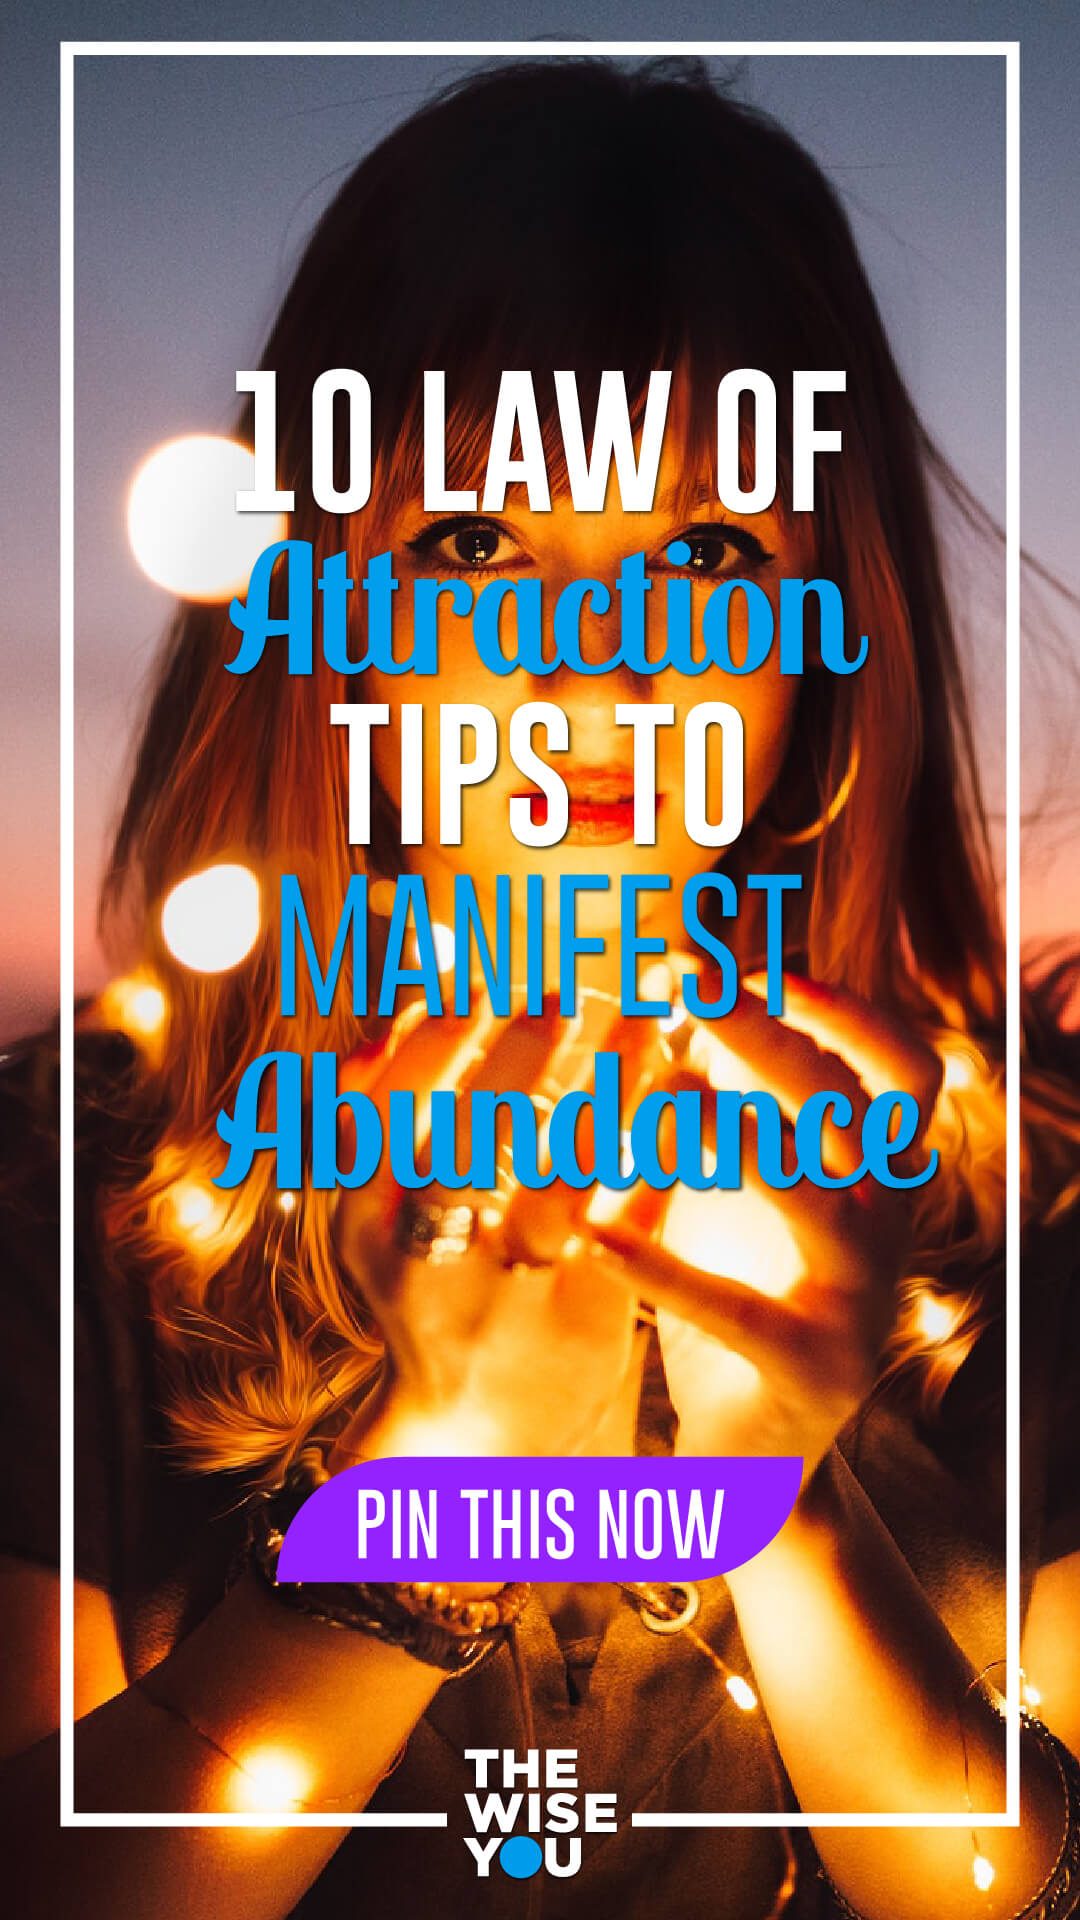 Law Of Attraction tips